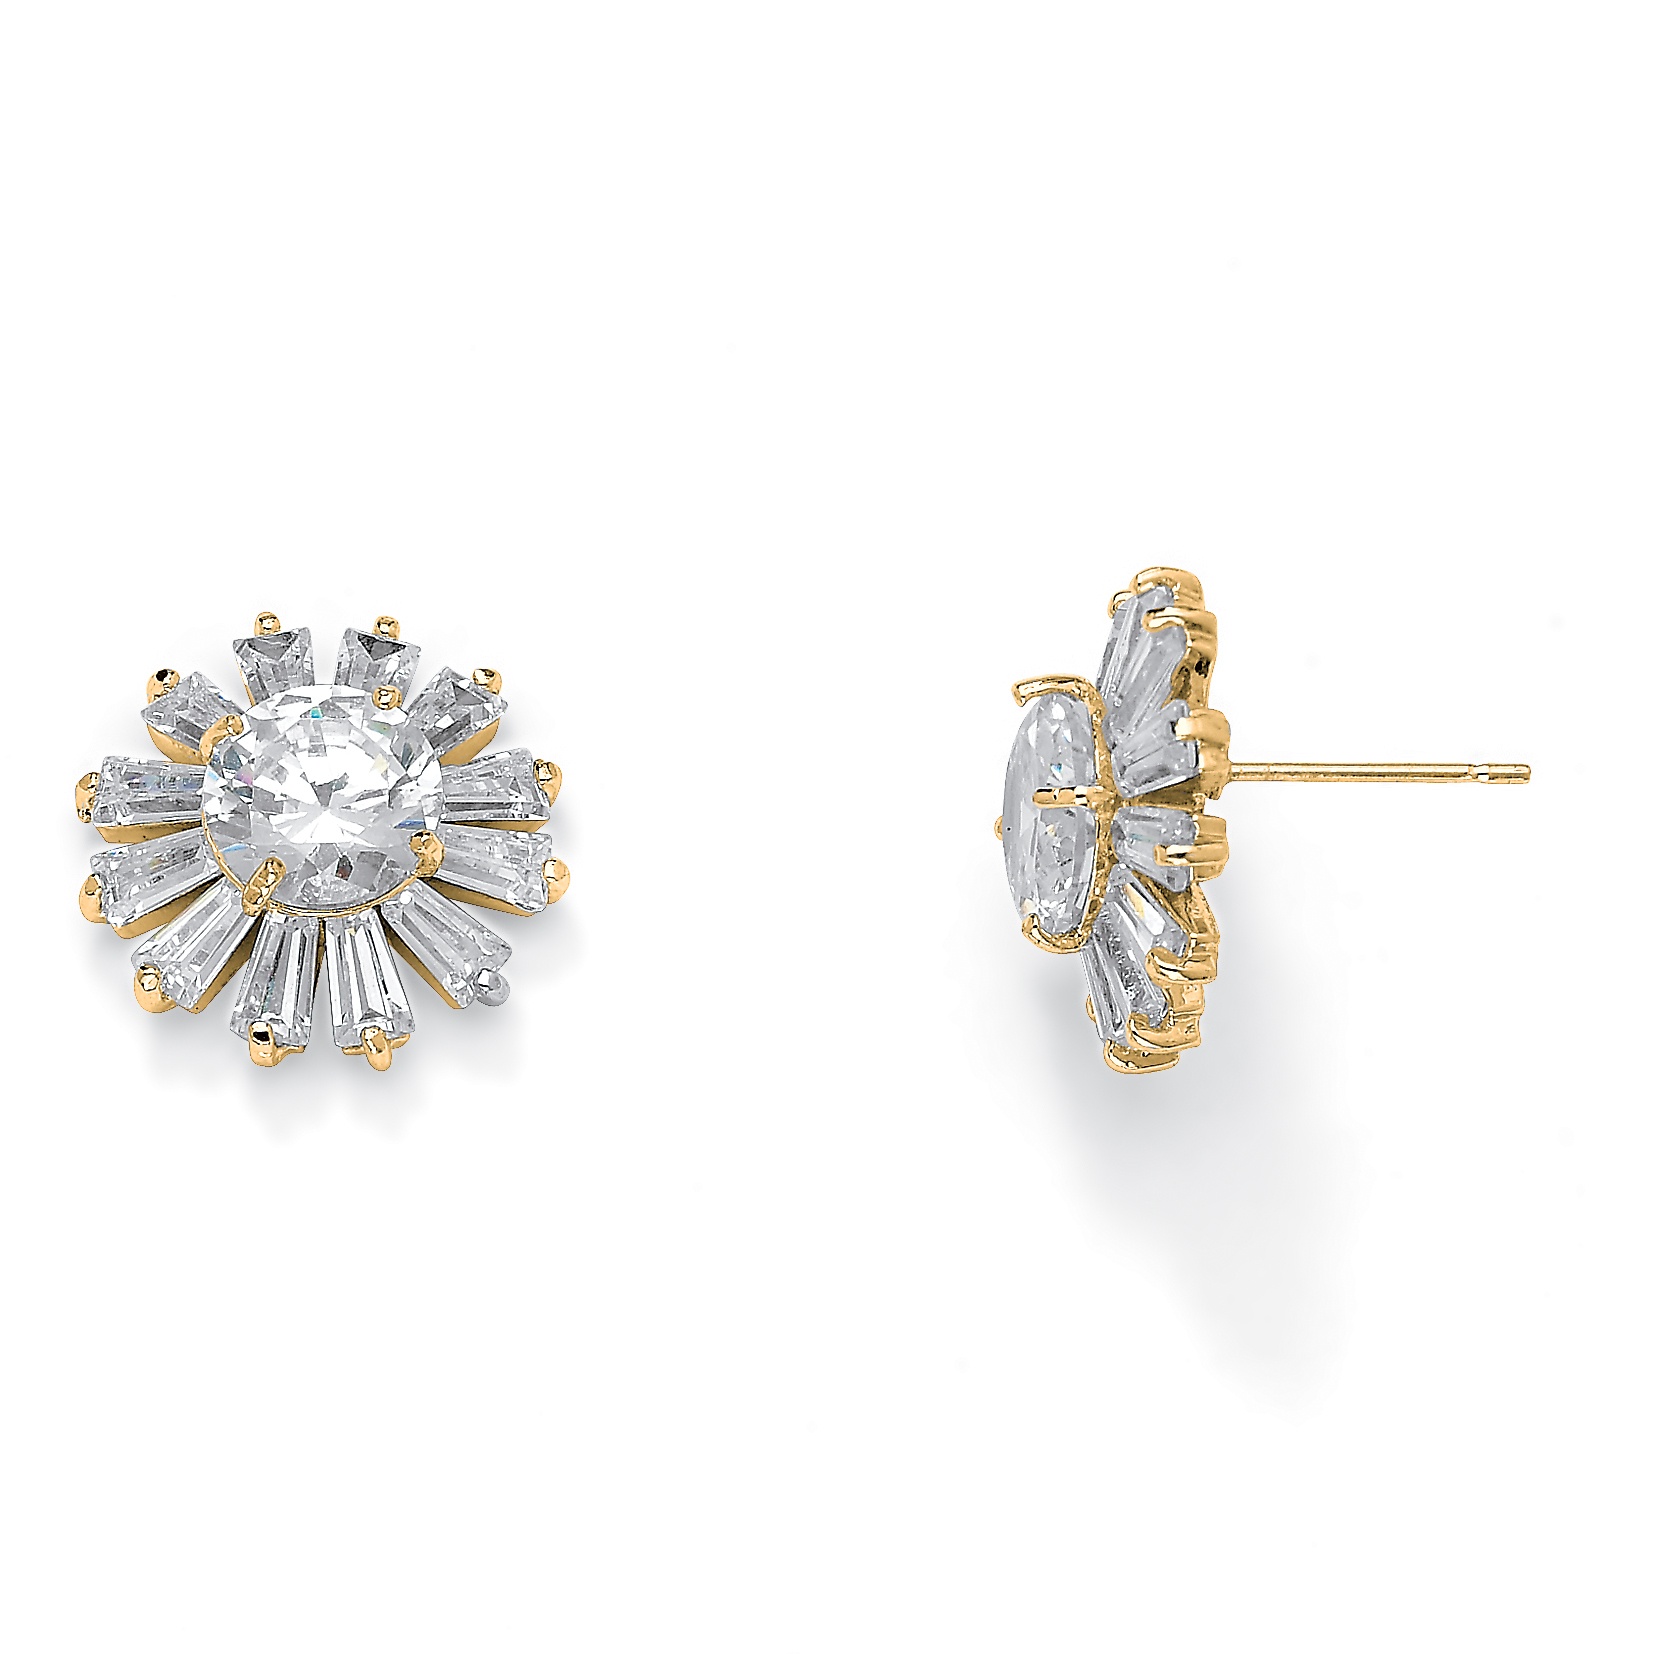 PalmBeach Jewelry Round Crystal and Baguette Starburst Stud Earrings in Yellow Gold Tone